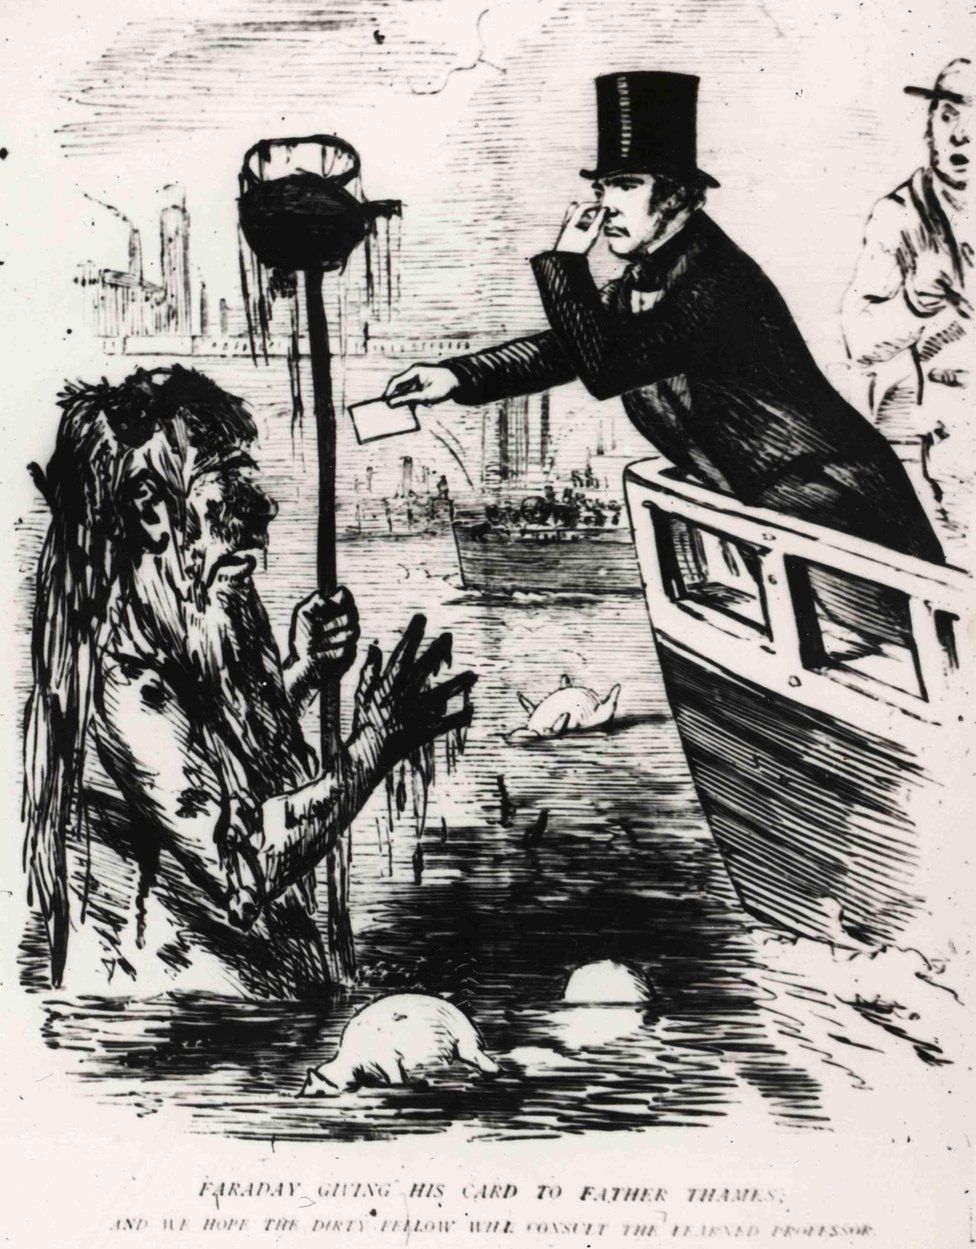 19th century cartoon of scientist meeting mythical "Father Thames"